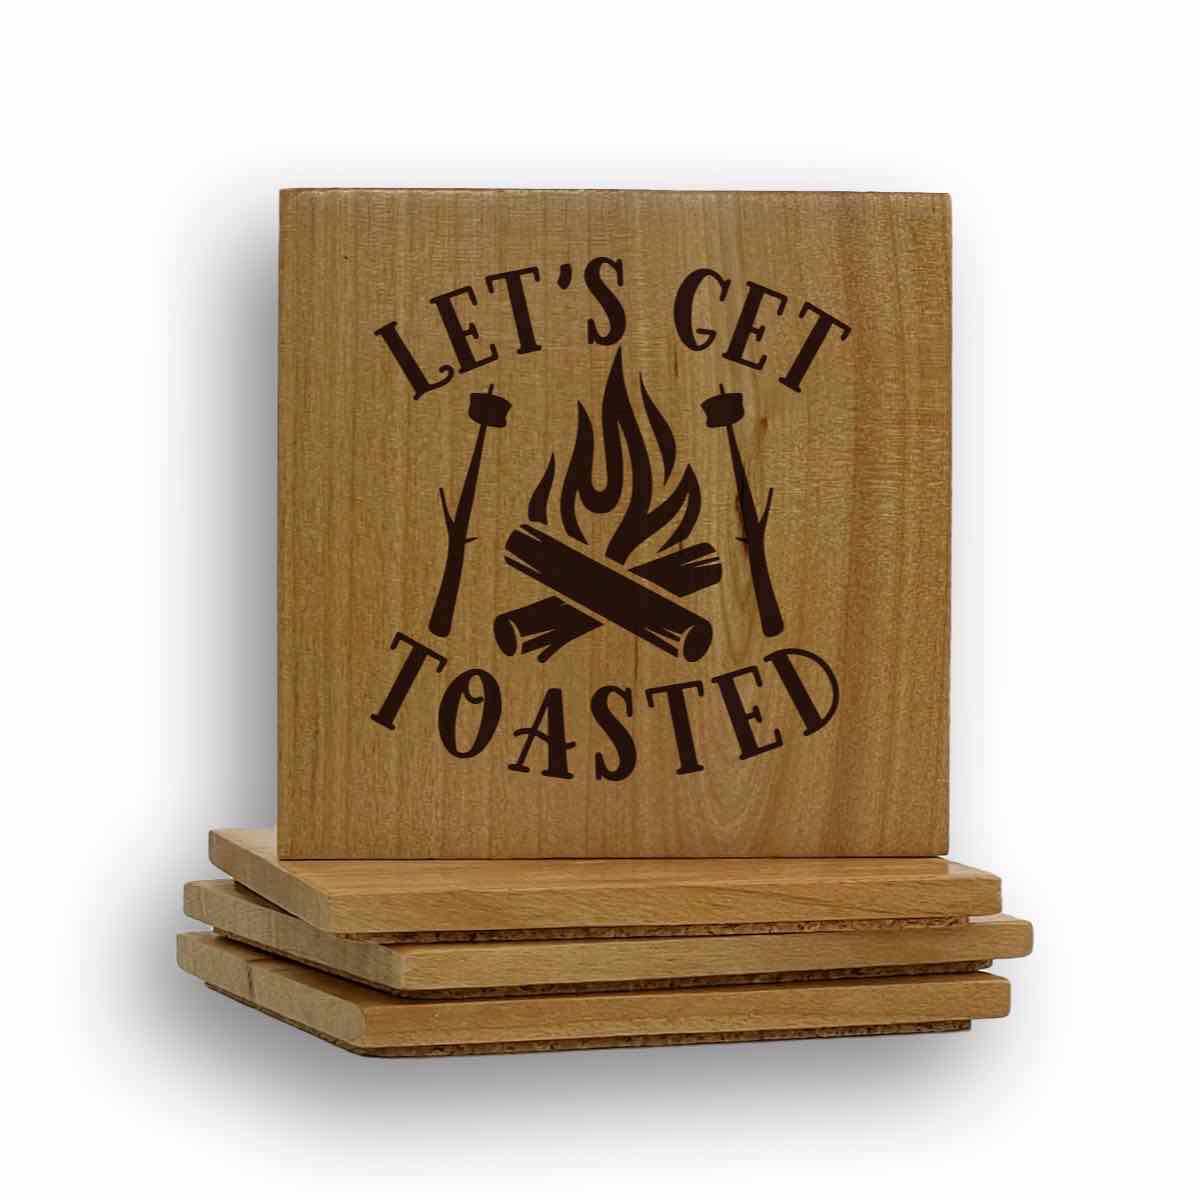 Let's Get Toasted Coaster